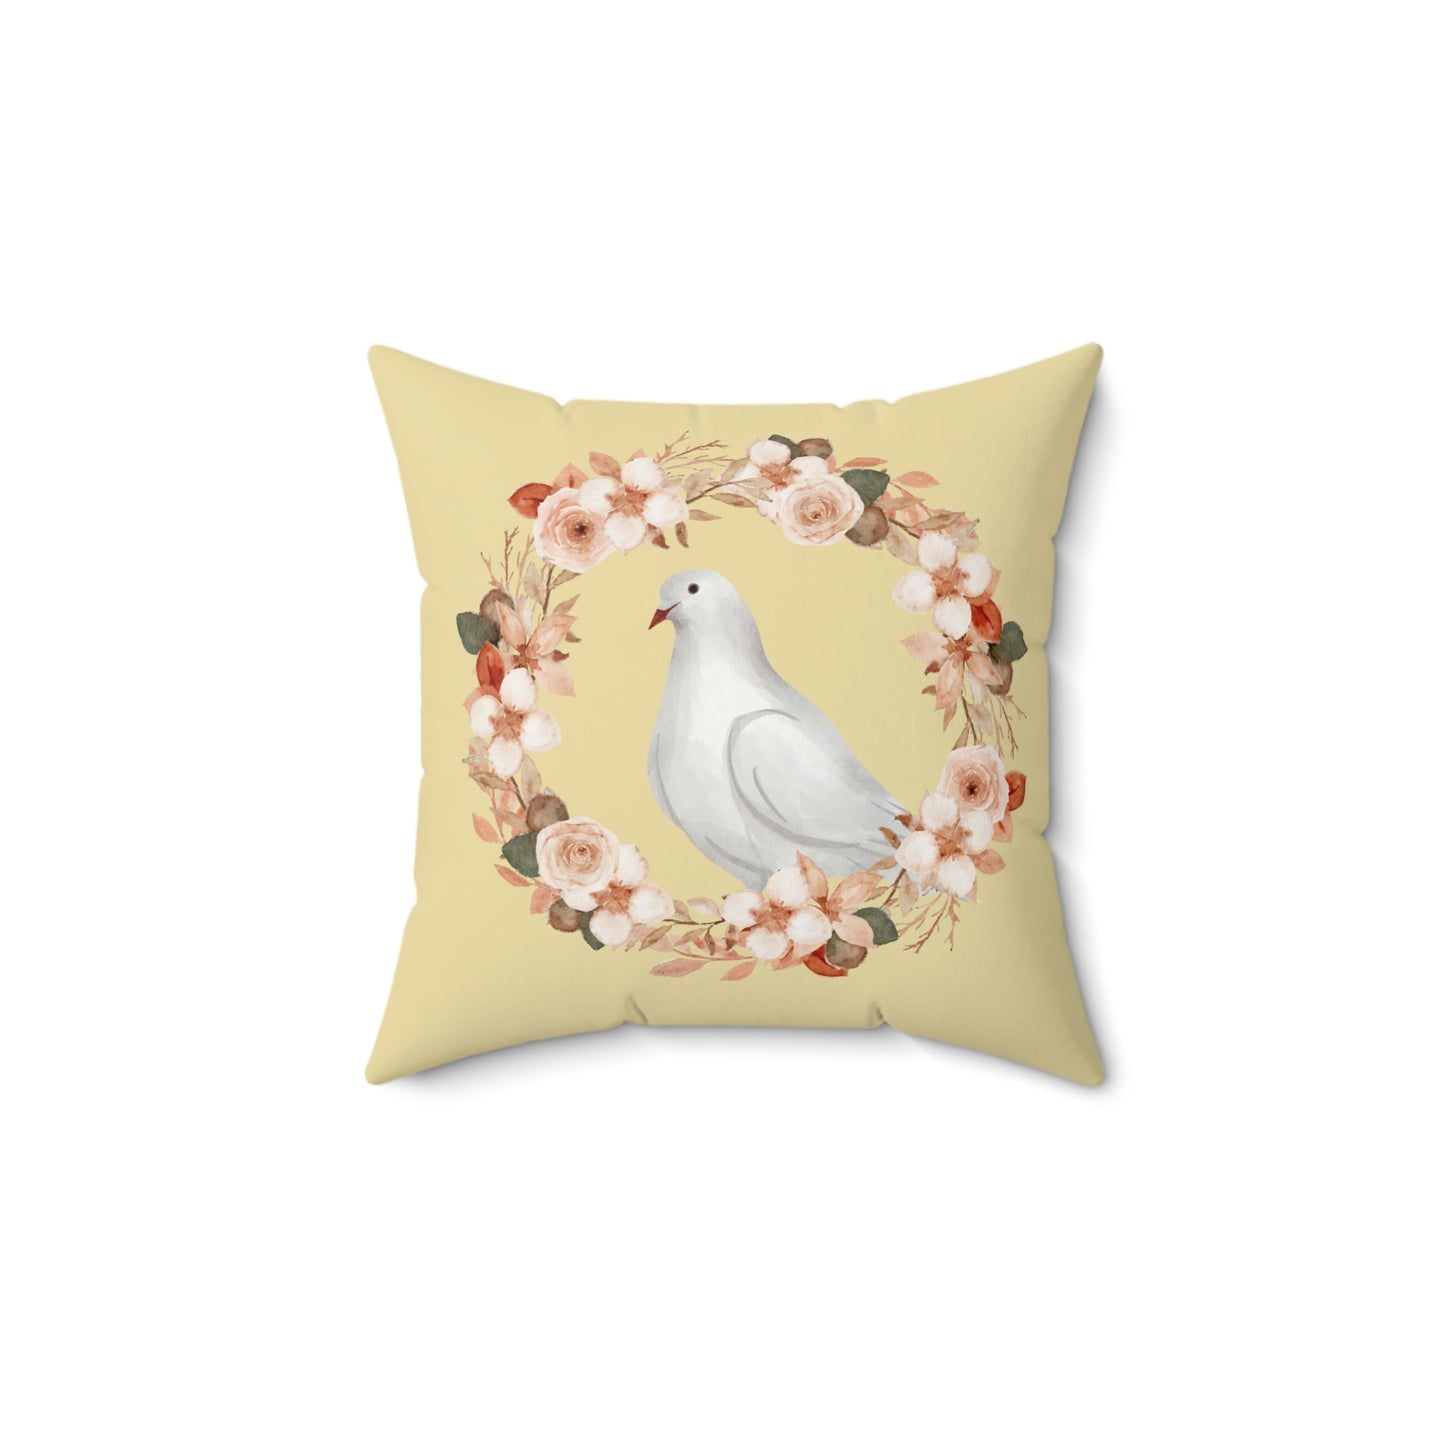 Pigeon/Dove Birds with Floral Wreath design Spun Polyester Square Indoor Pillow